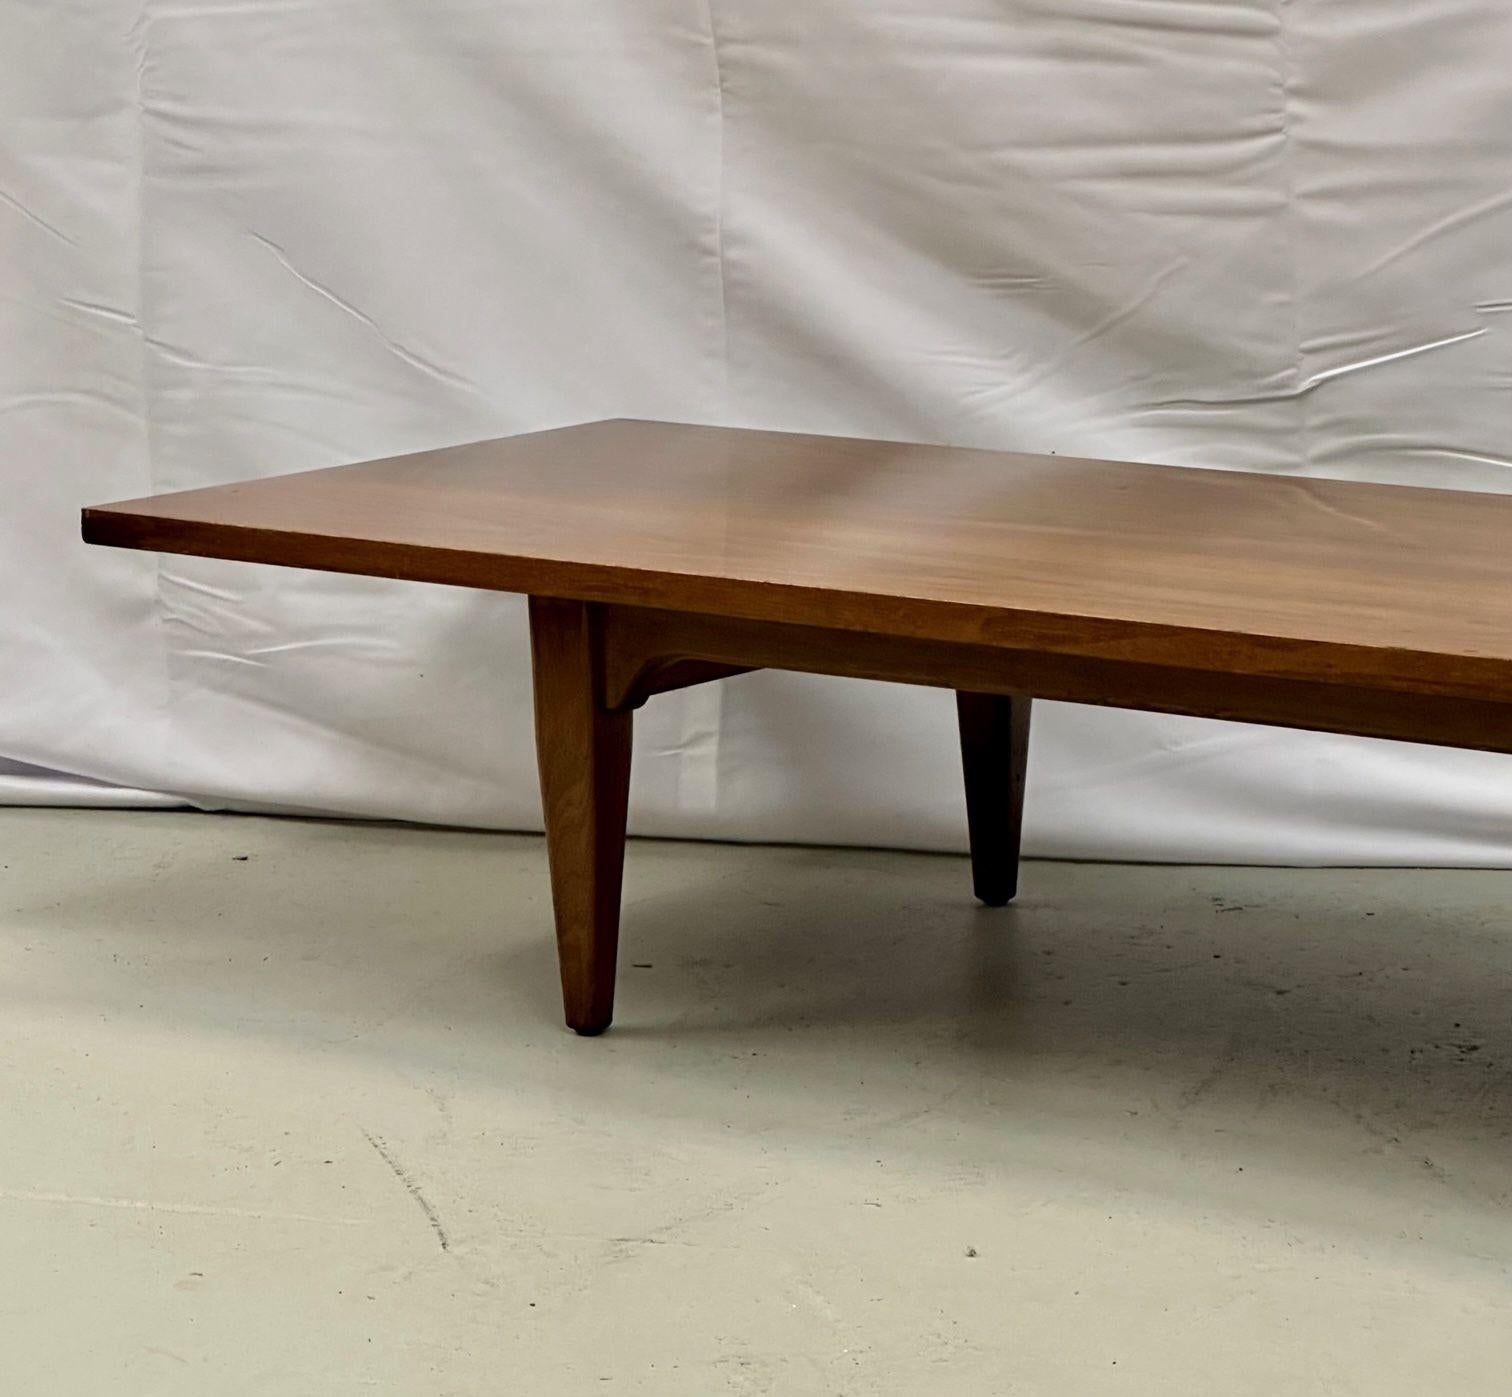 Danish Mid-Century Modern Cocktail or Coffee Table, 1950s, Solid Teak In Good Condition For Sale In Stamford, CT